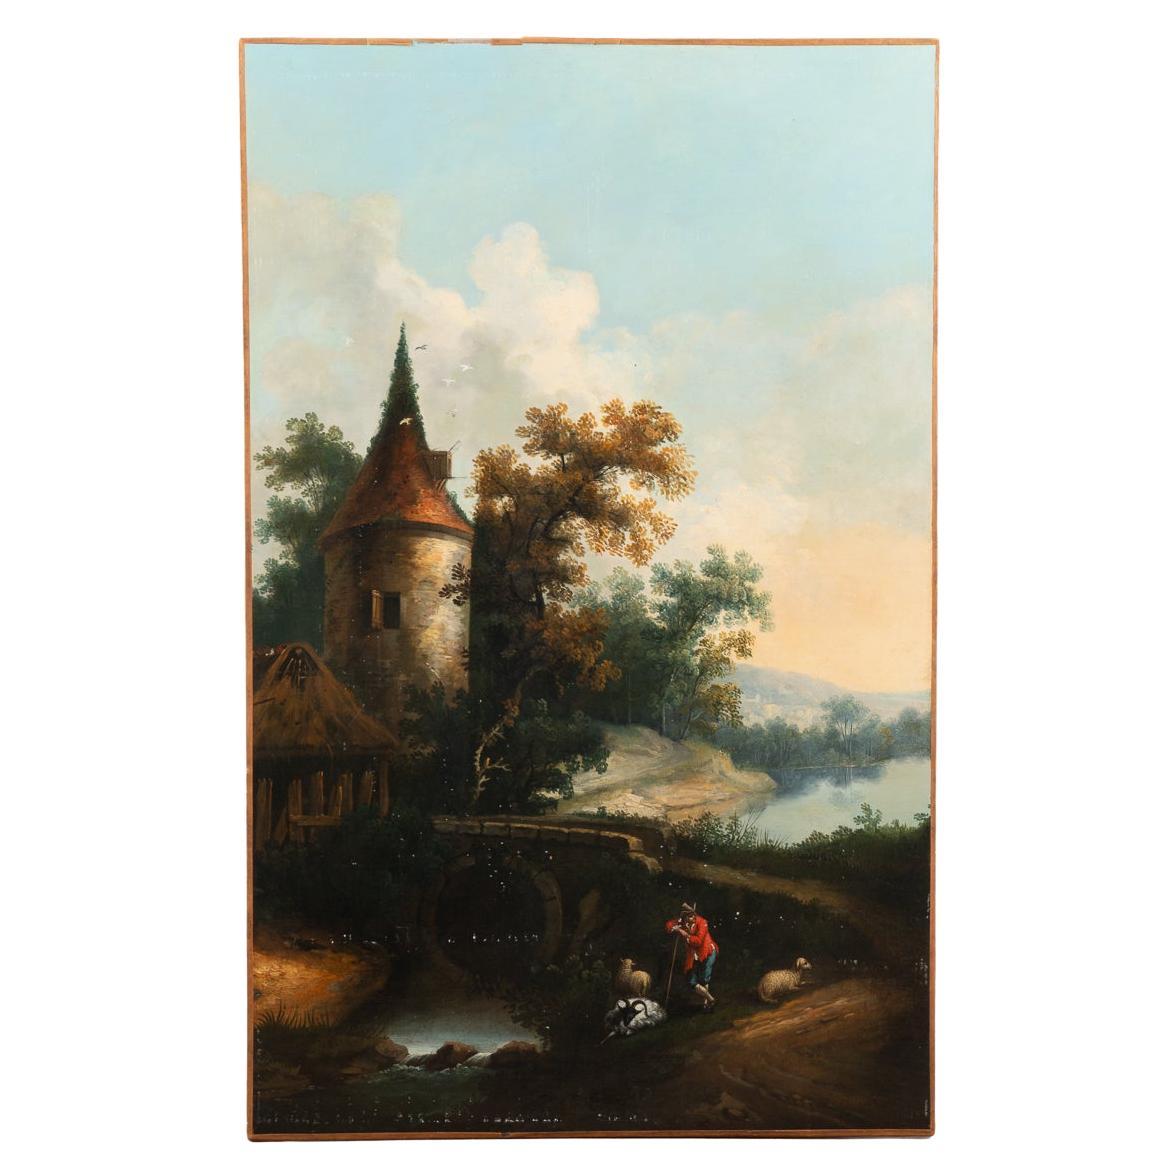 Original Oil on Canvas Painting of Shepherd at River in Evening, circa 1790-1810